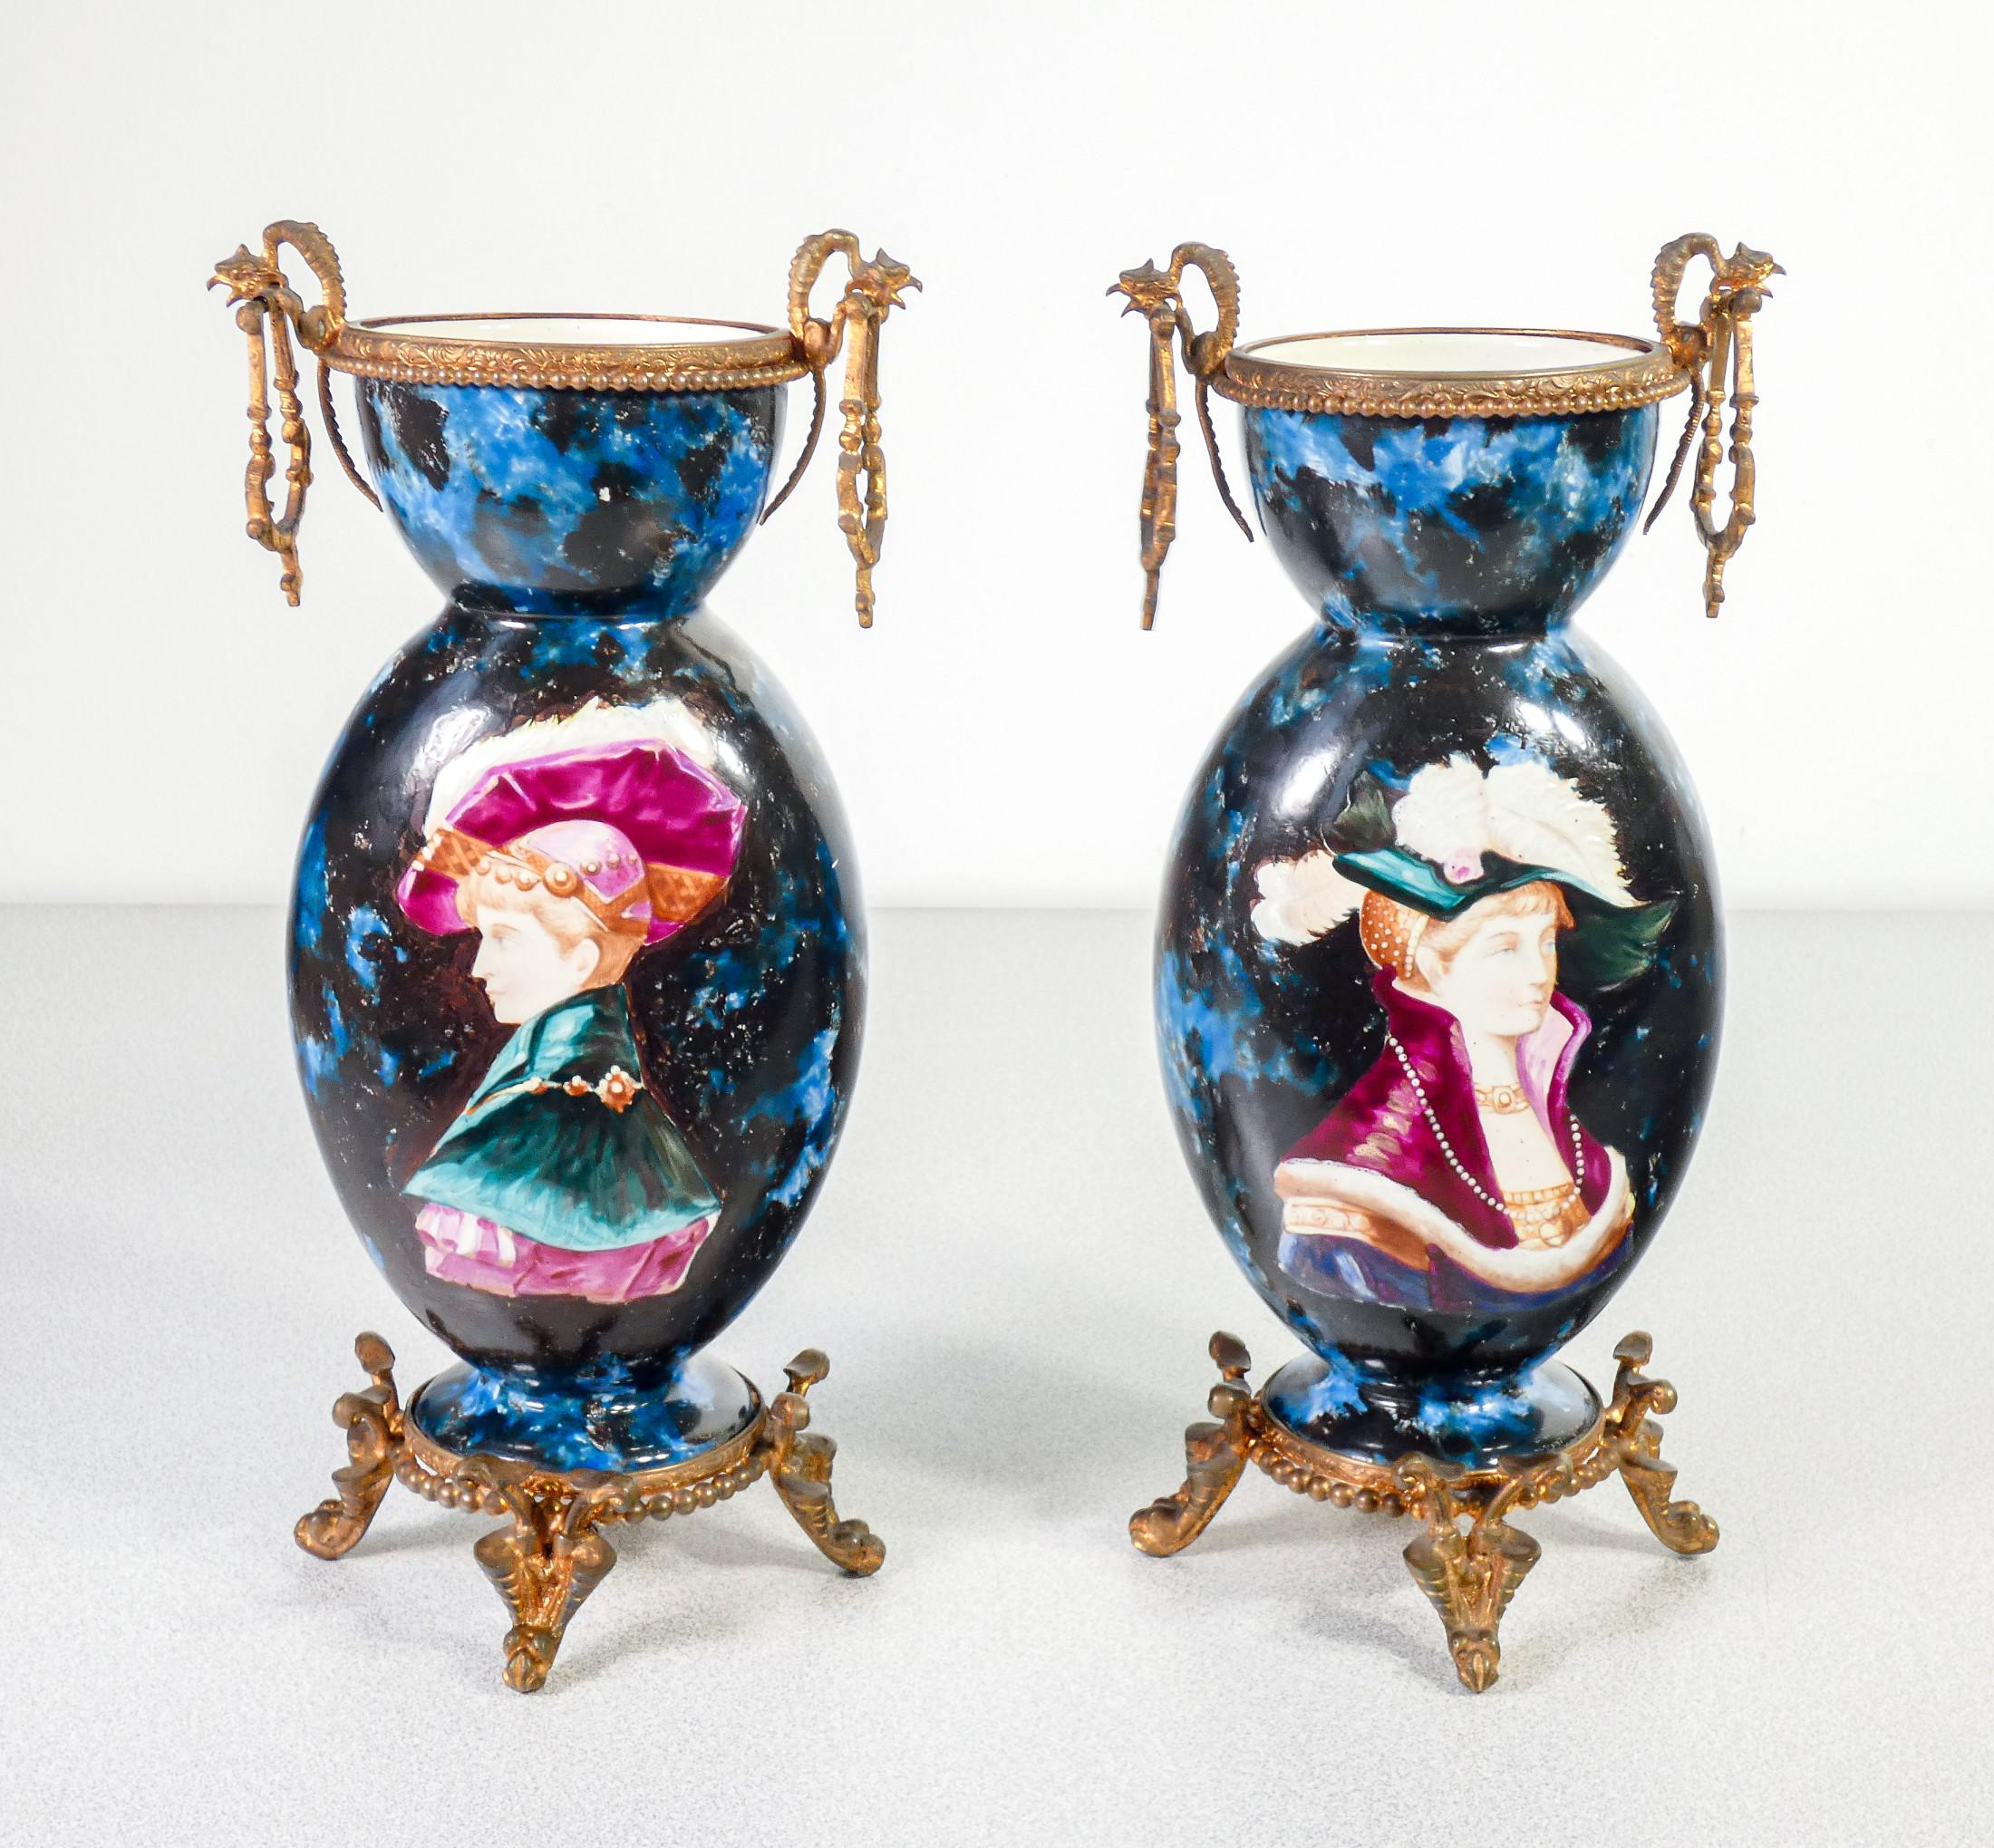 Pair of vases
glazed ceramic
and hand-painted,
with bronze elements.
Second Half of the Nineteenth Century

PERIOD
Second Half
of the nineteenth century

MATERIALS
Glazed ceramic
and hand-painted.
Bronze elements

DIMENSIONS
H 28.5
L 14 x 12.5